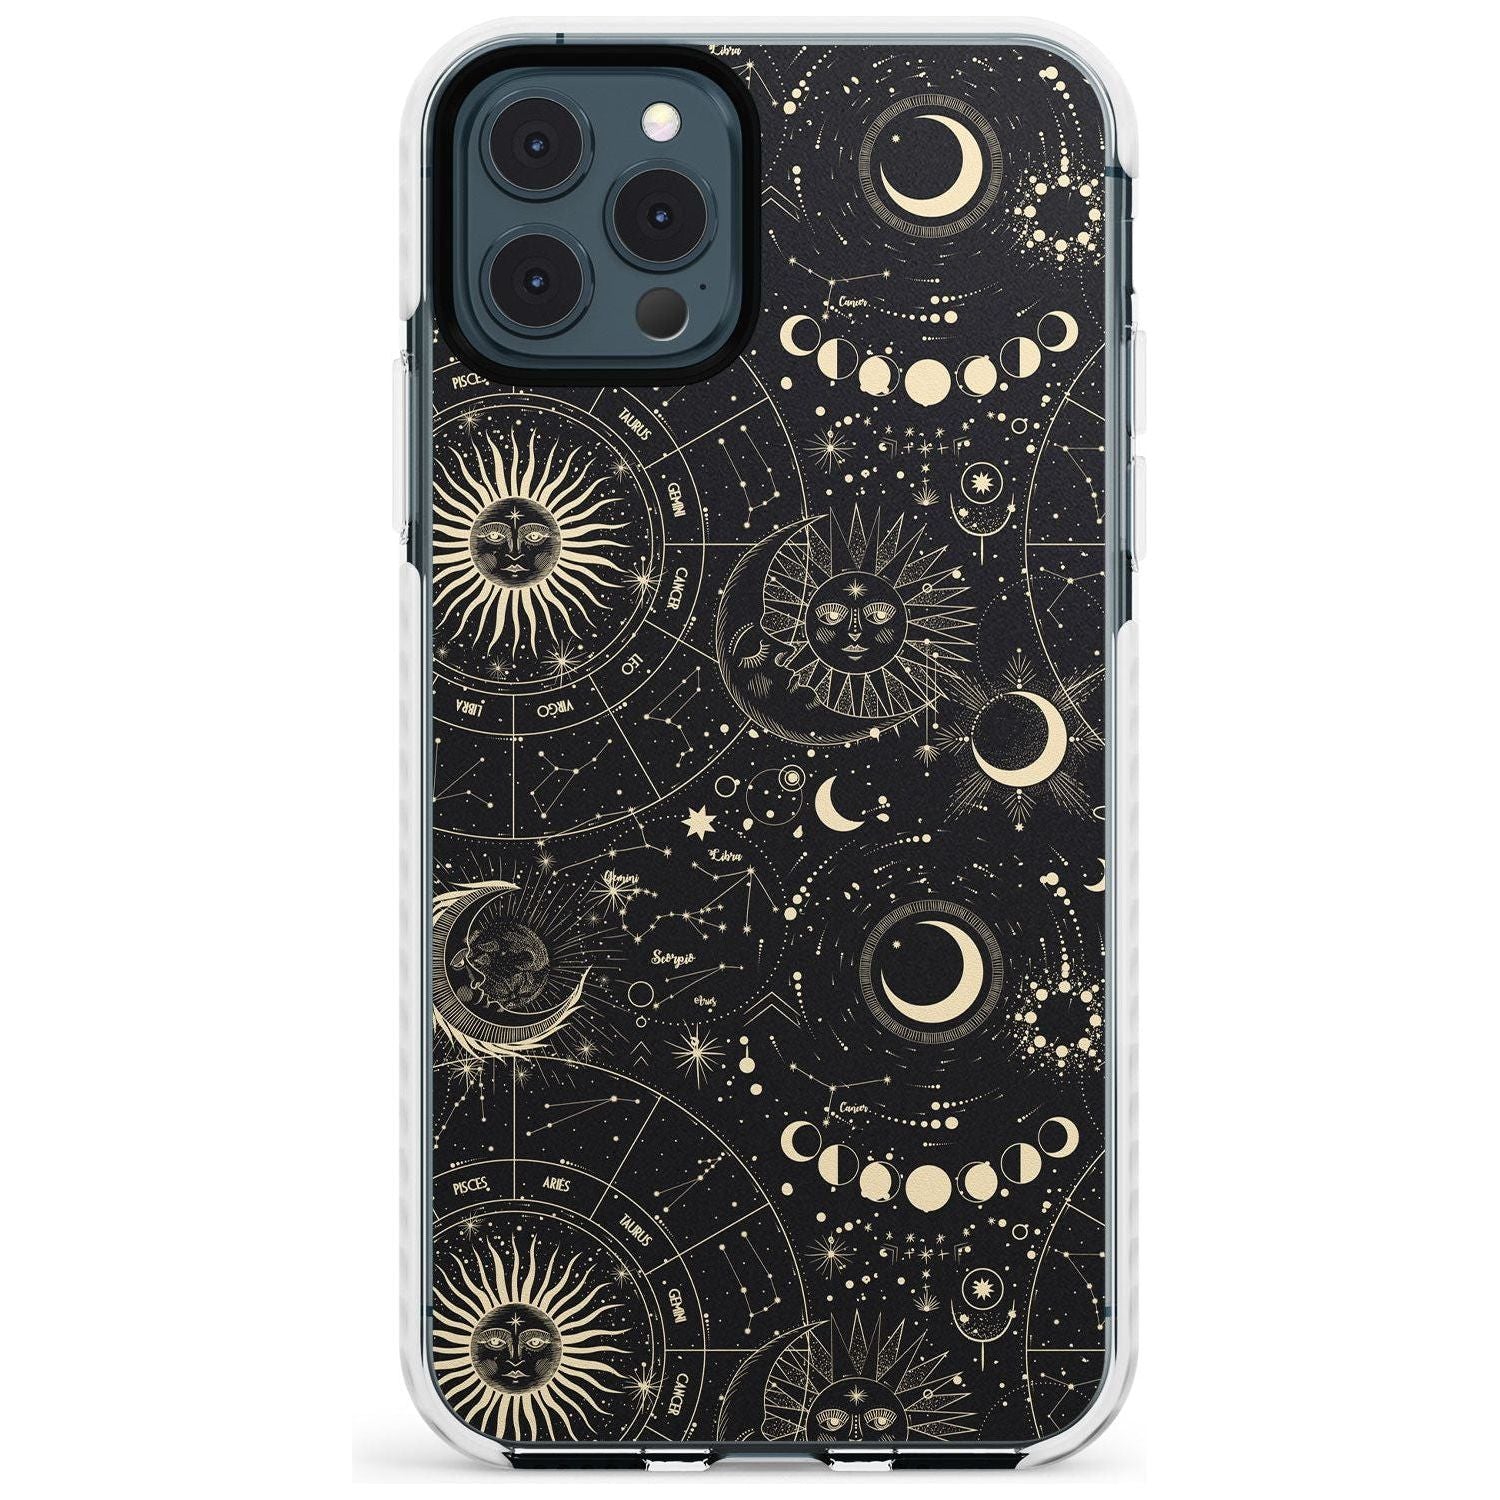 Suns, Moons & Star Signs Slim TPU Phone Case for iPhone 11 Pro Max